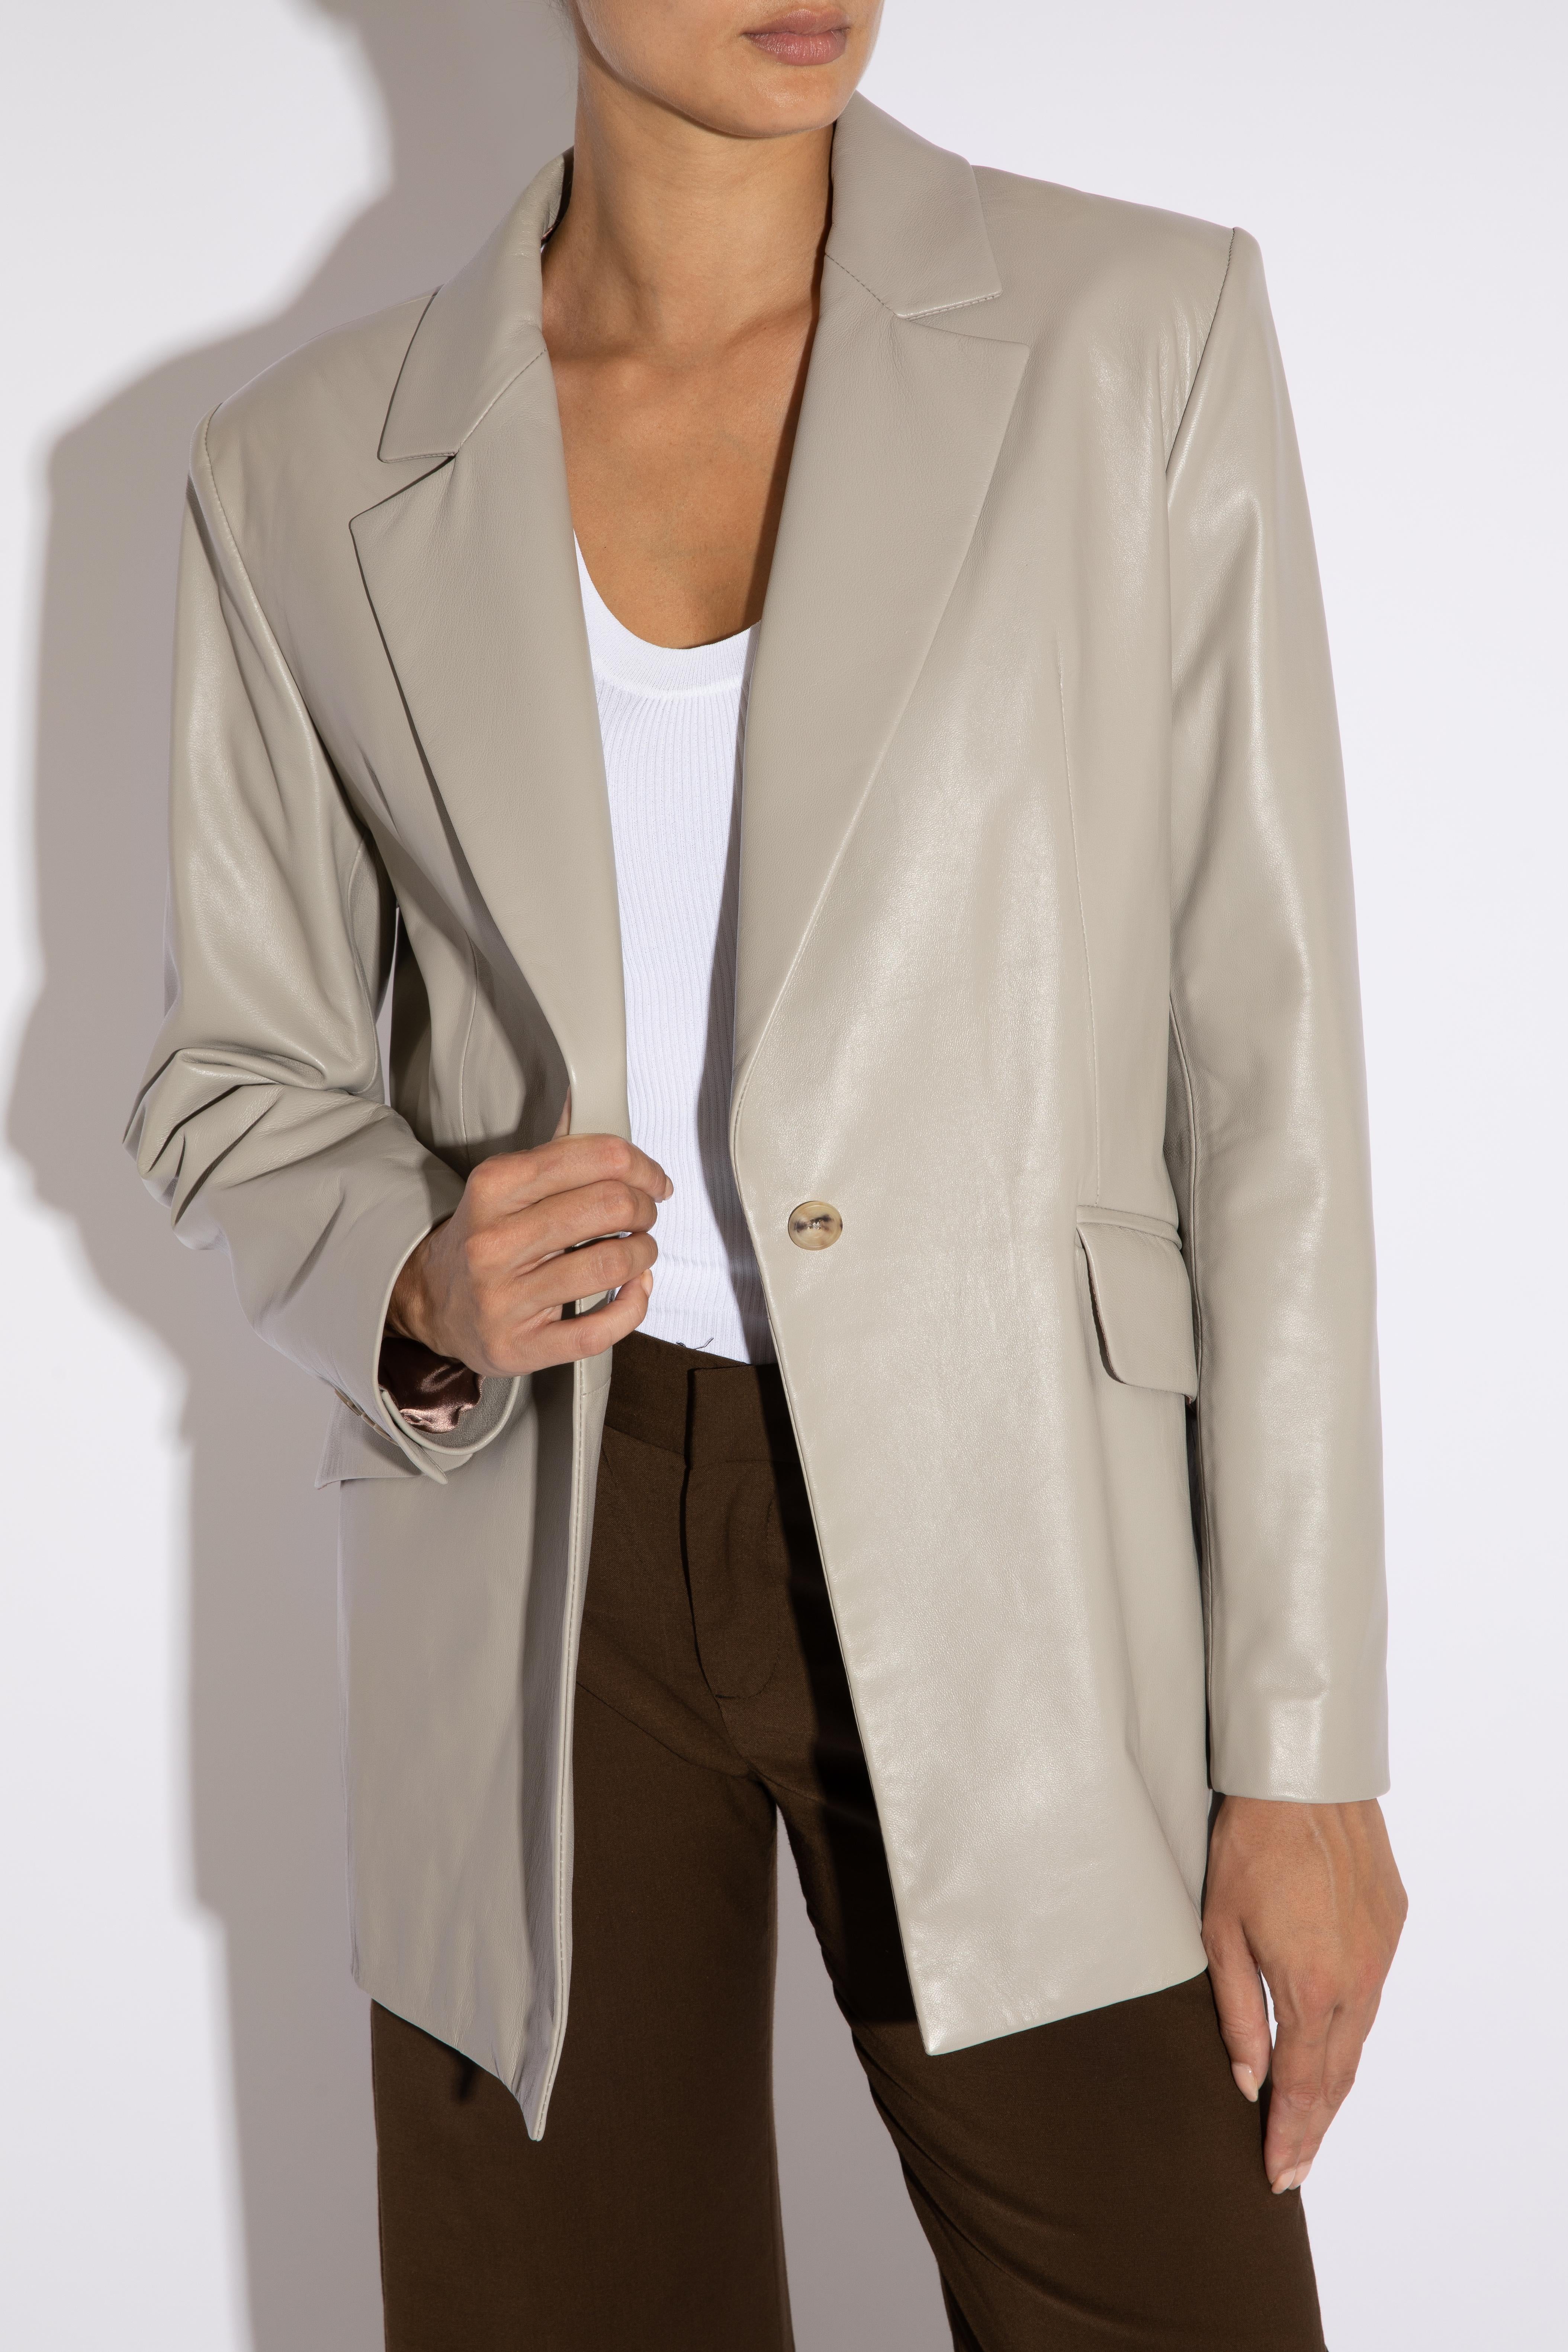 Verheyen London Chesca Oversize Blazer in Stone Grey Leather, Size 10

Handmade in London, made with lamb leather this luxury item is an investment piece to wear for a lifetime.  Made with an oversize fit, its ideal for wearing with a jumper for